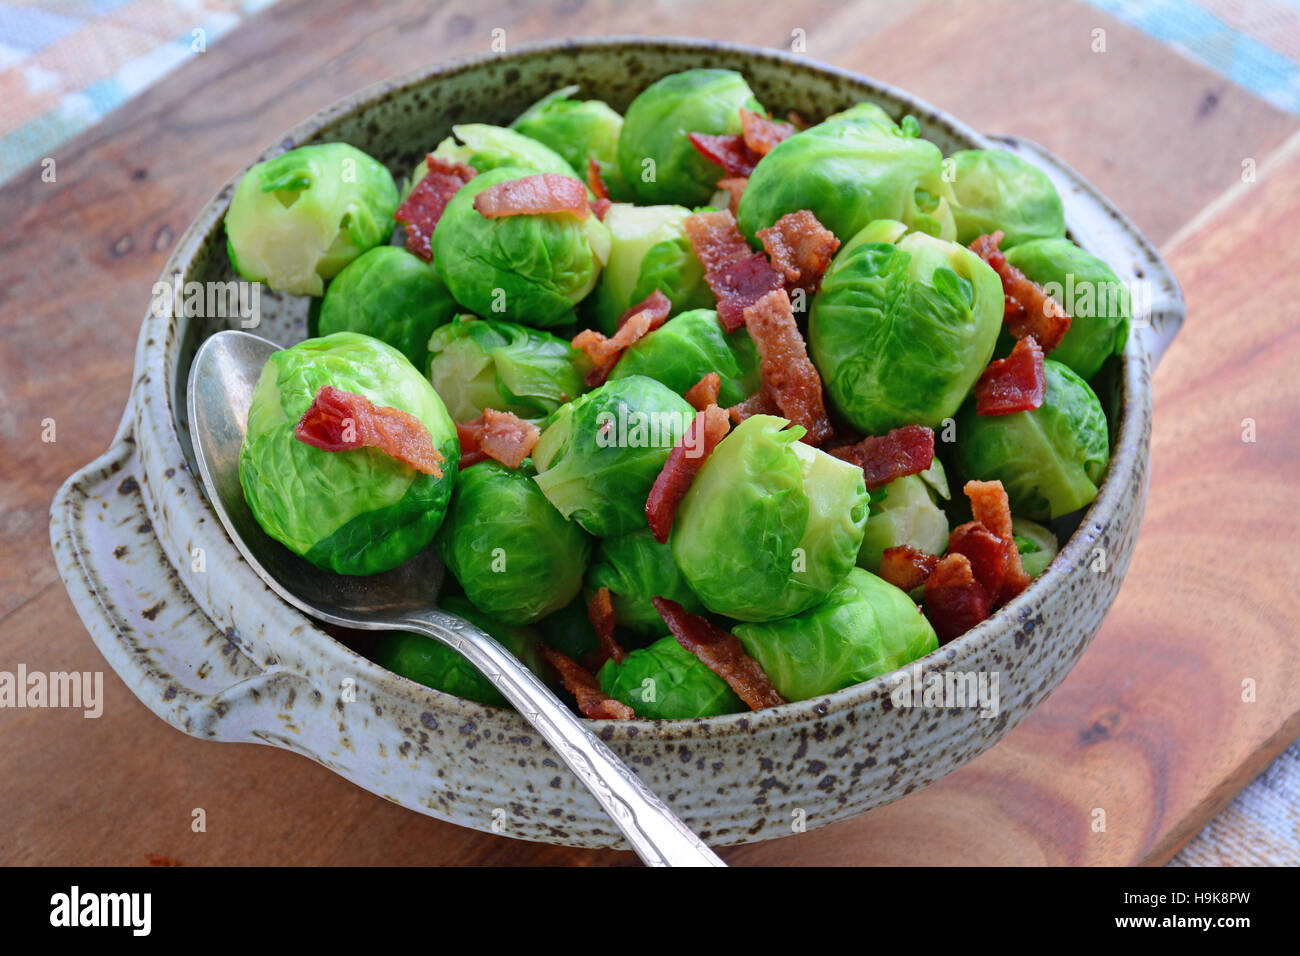 Fresh steamed brussels sprouts with crisp bacon bits in speckled serving dish. Shot in natural light in horizontal format. Stock Photo